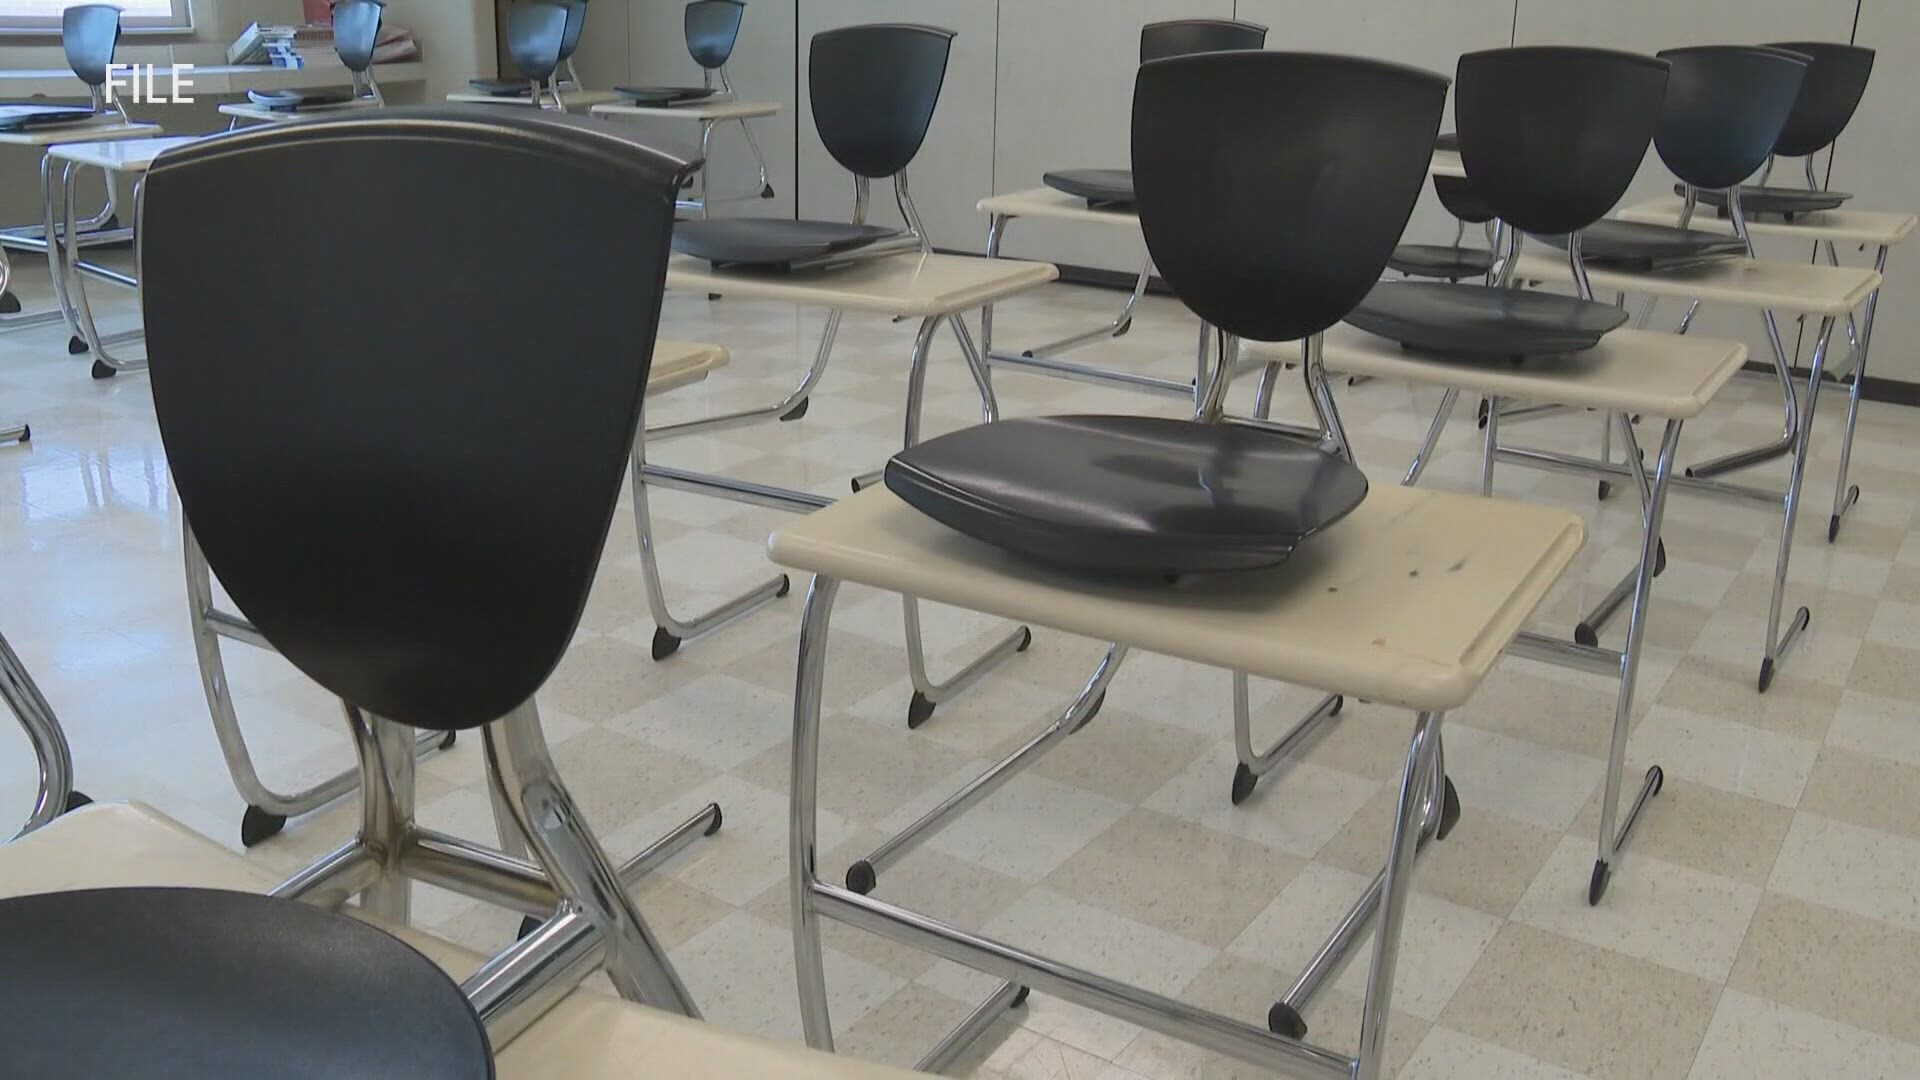 Today is the last day of school for GRPS, the largest school district in West Michigan.